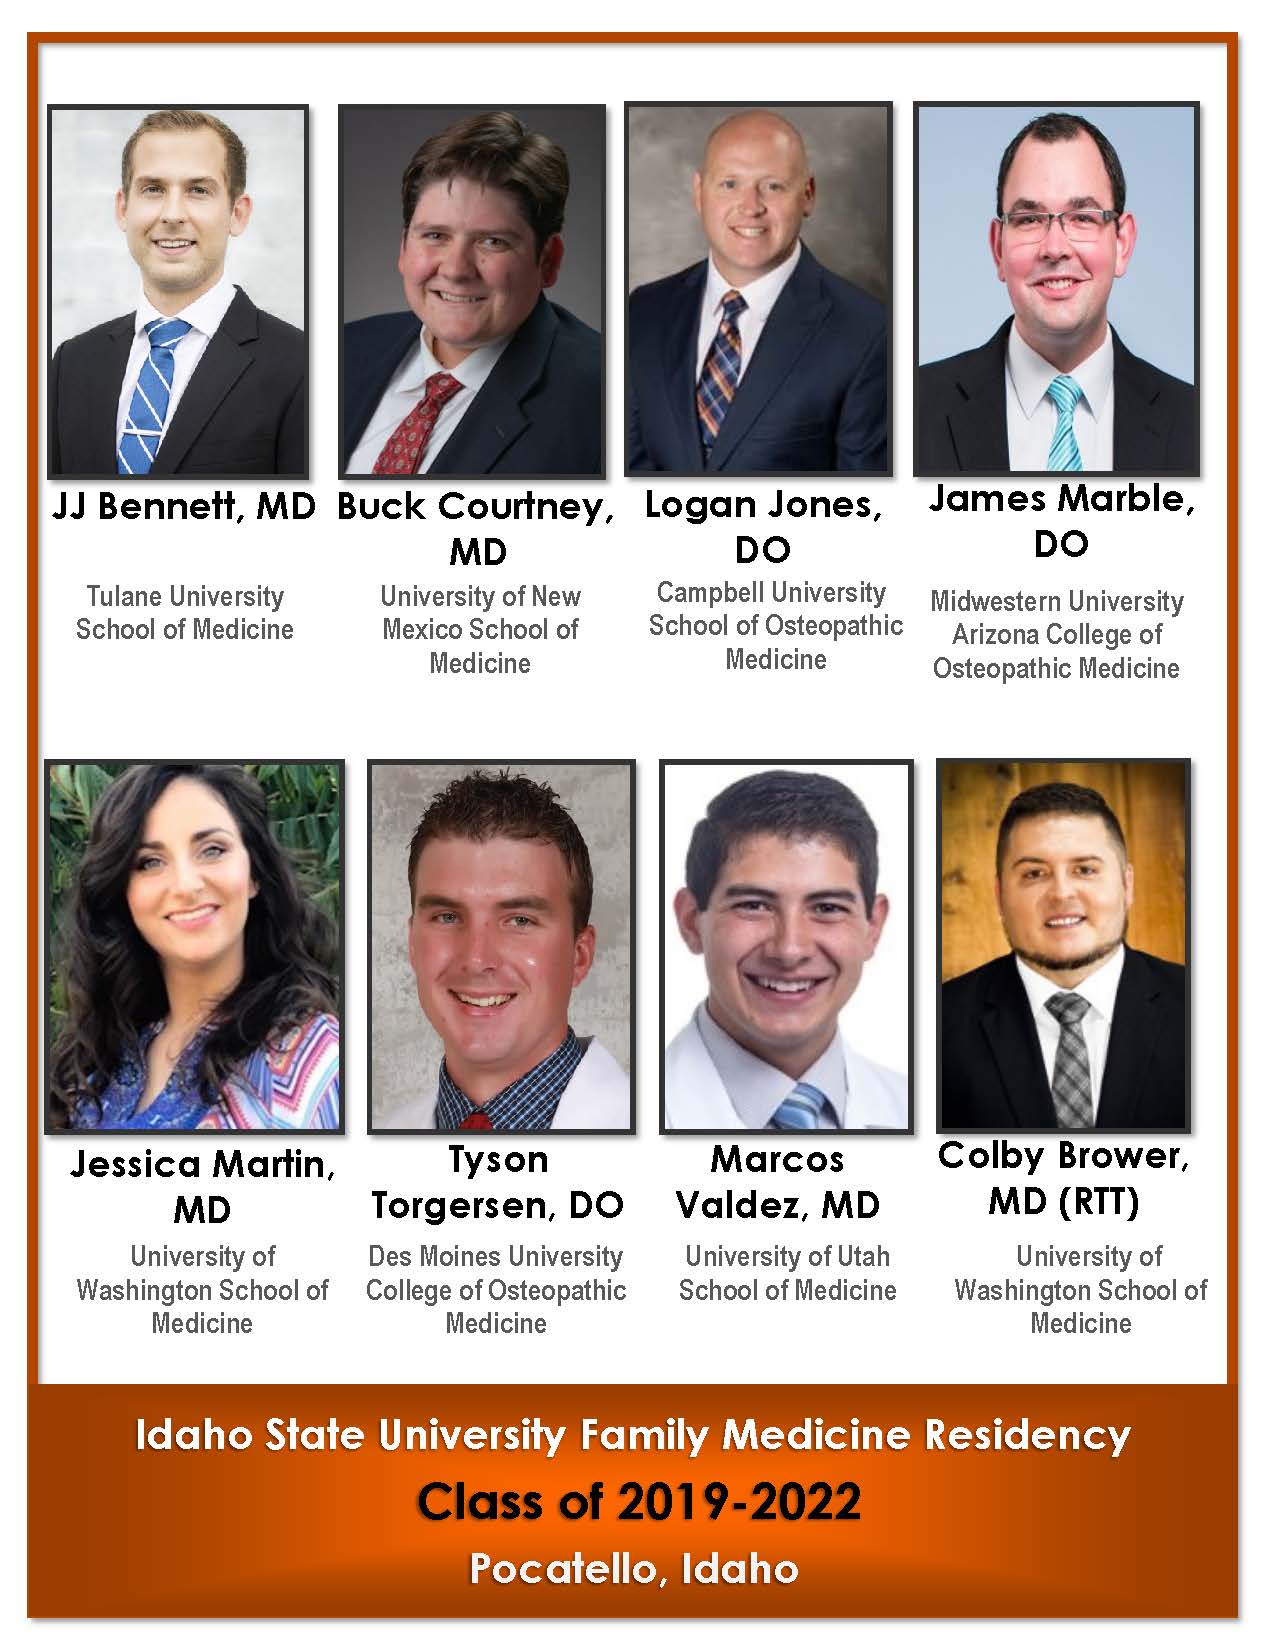 Eight images showing the new Family Medicine Residency Class of 2022 physicians